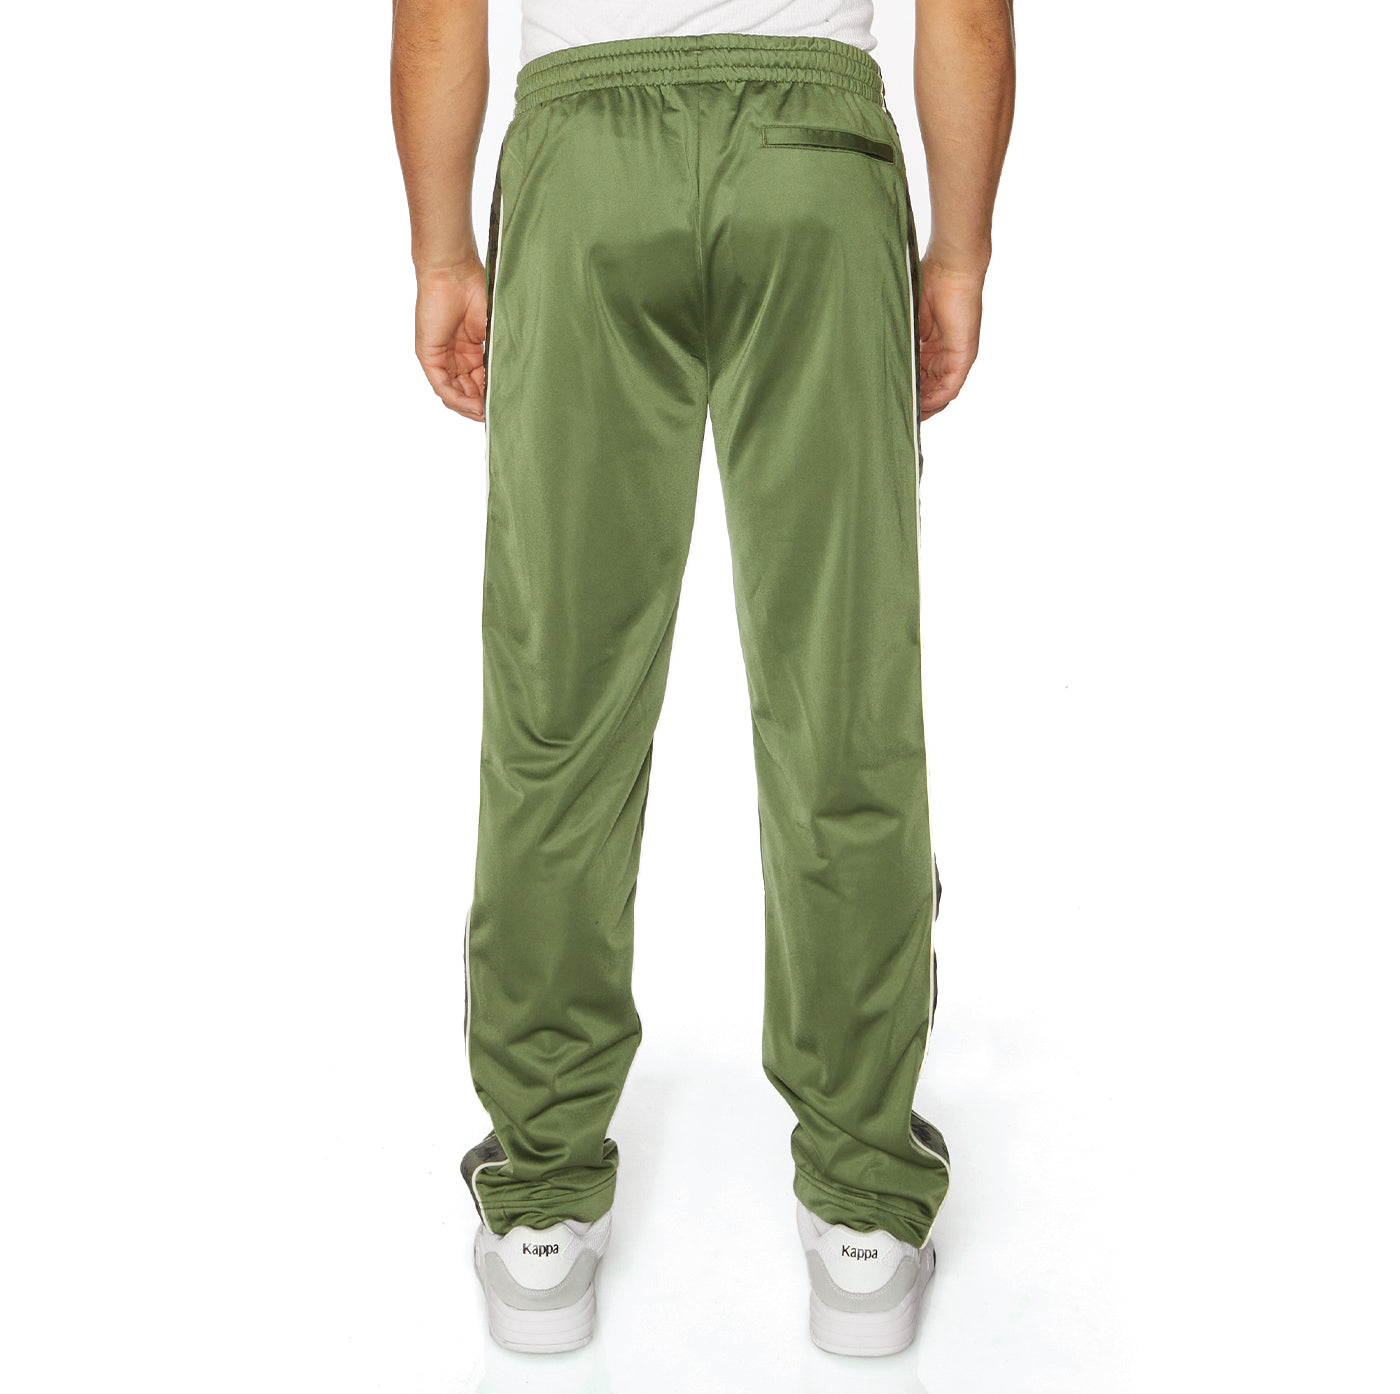 Kappa Men Blue Polyester Slim Fit Solid Track Pants_Navy_XL : Amazon.in:  Clothing & Accessories